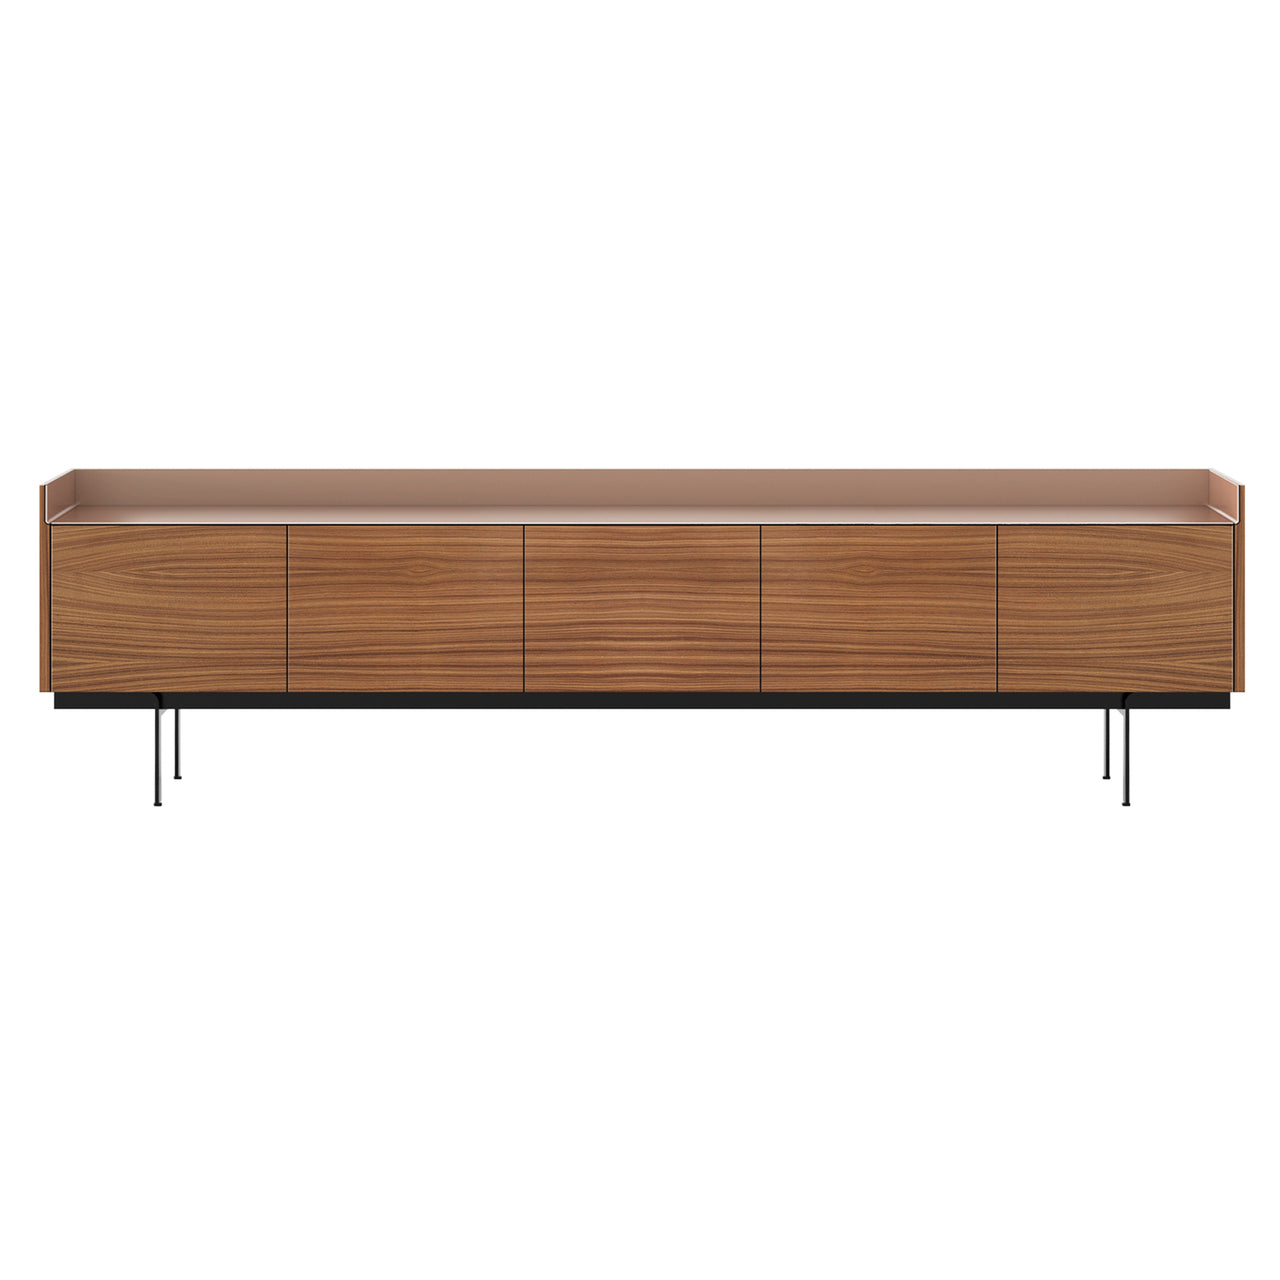 Stockholm Sideboard: STH503 + Walnut Stained Walnut + Anodized Aluminum Pale Rose + Black